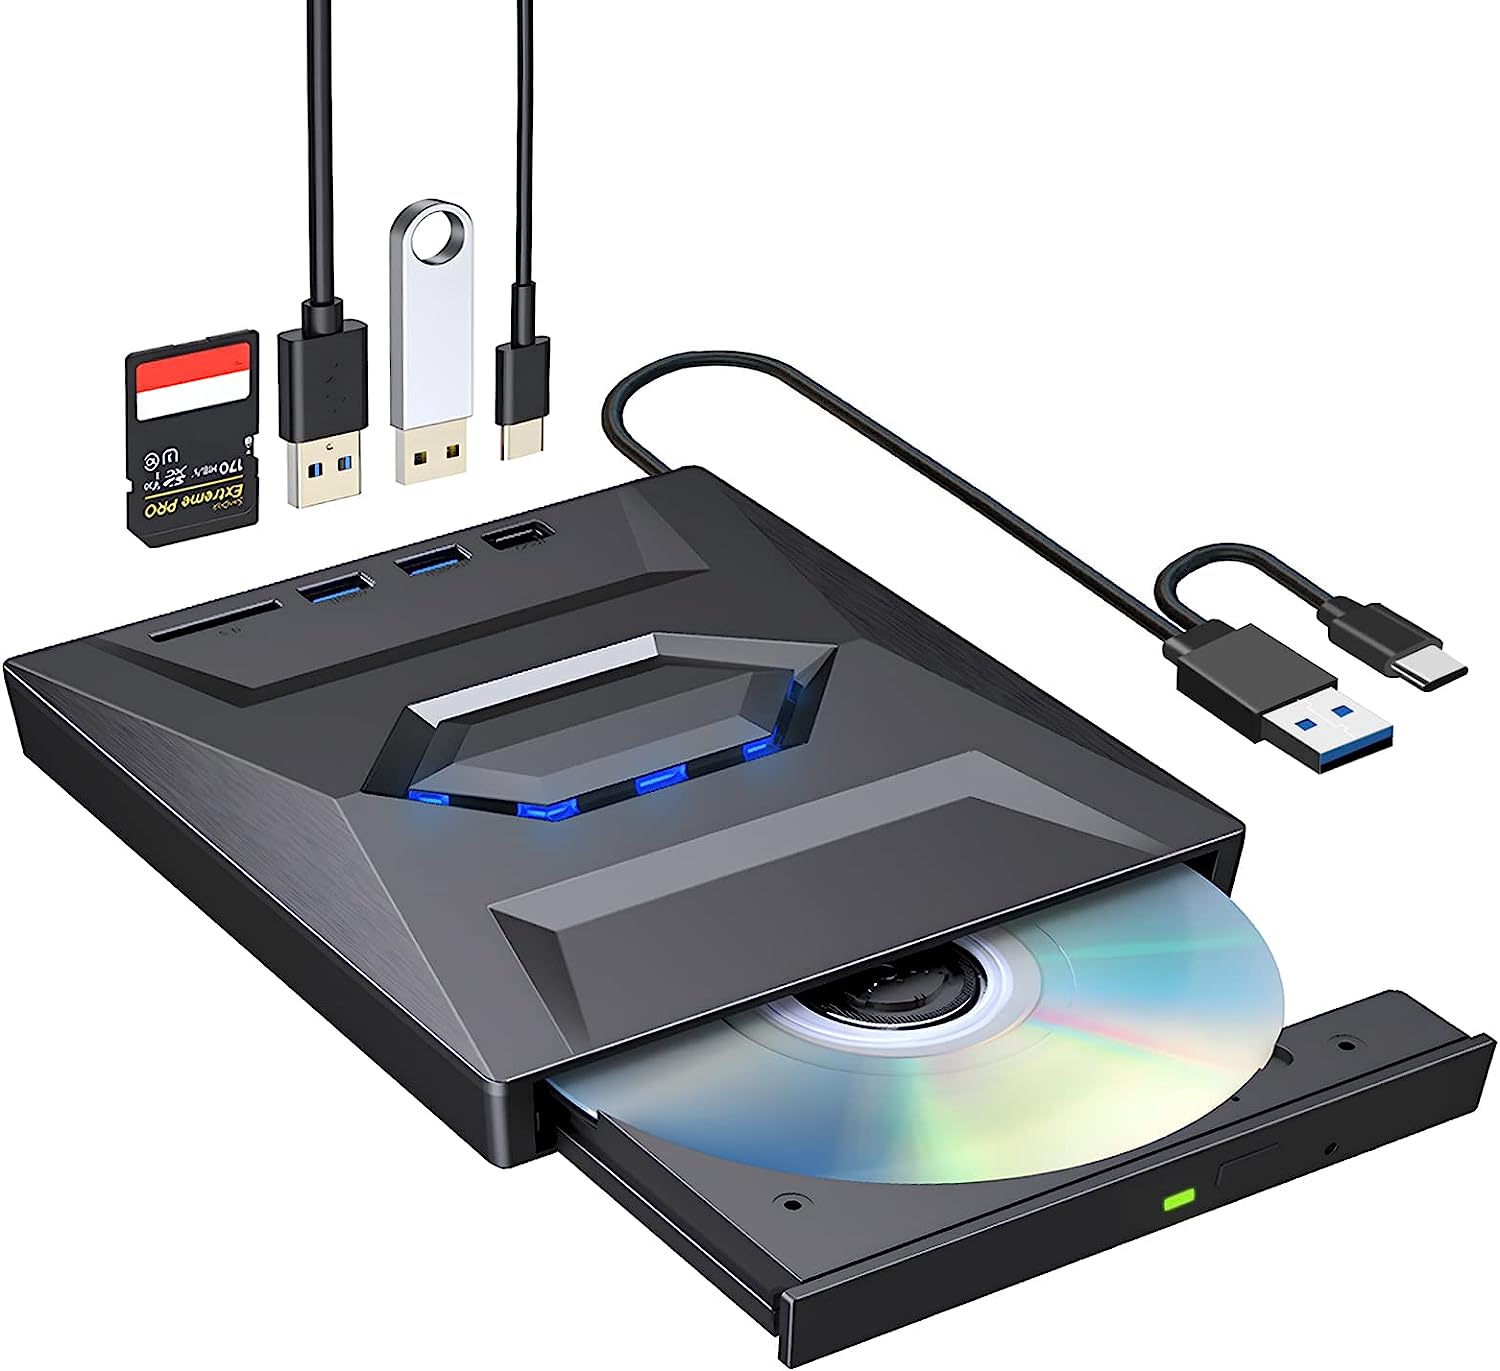 External CD/DVD Drive with Card Reader and USB Ports